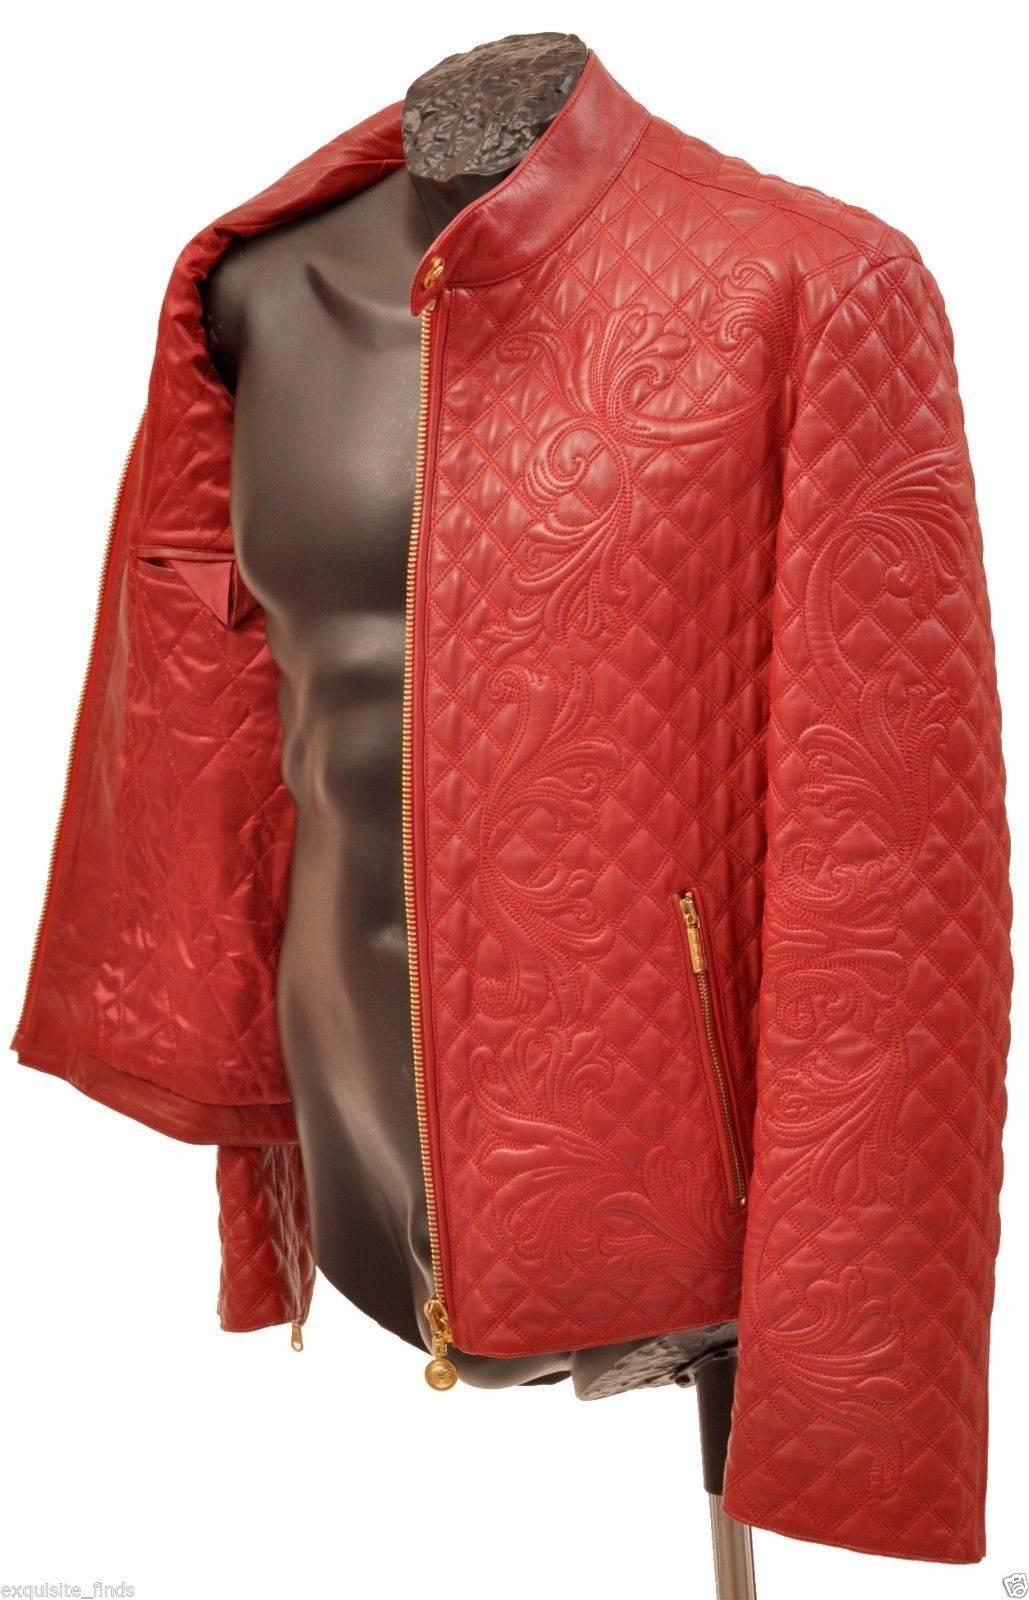 VERSACE  

Red leather jacket for men.

Barocco embroidery.

Italian size is 50 - US 40

100% leather

Gold tone hardware

Fully lined

Made in Italy

Brand new

Retail price is $6,750.00 